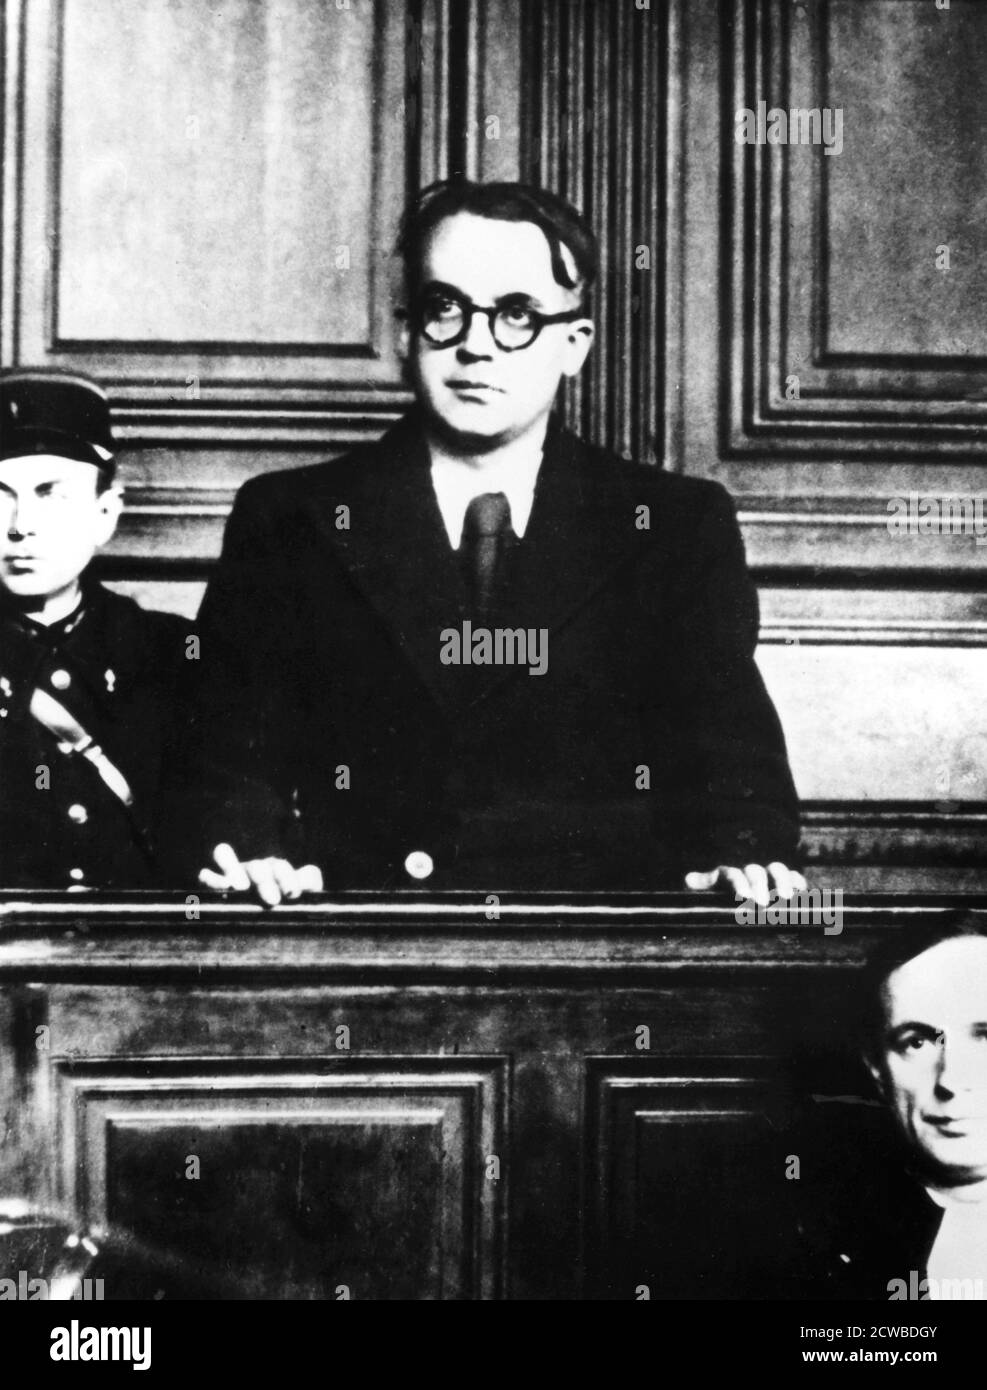 Trial of the French pro-Nazi author Robert Brasillach, Paris, 1945. A supporter of fascism since 1934, Brasillach edited an anti-semitic newspaper, Je suis partout, during the Nazi occupation of France. He also supported the German occupation of Vichy France and signed a 1944 document calling for the summary execution of all French Resistance members. Arrested after Paris fell to the Allies, he was convicted of cooaboration and executed by firing squad on 6 February 1945. The photographer is unknown. Stock Photo